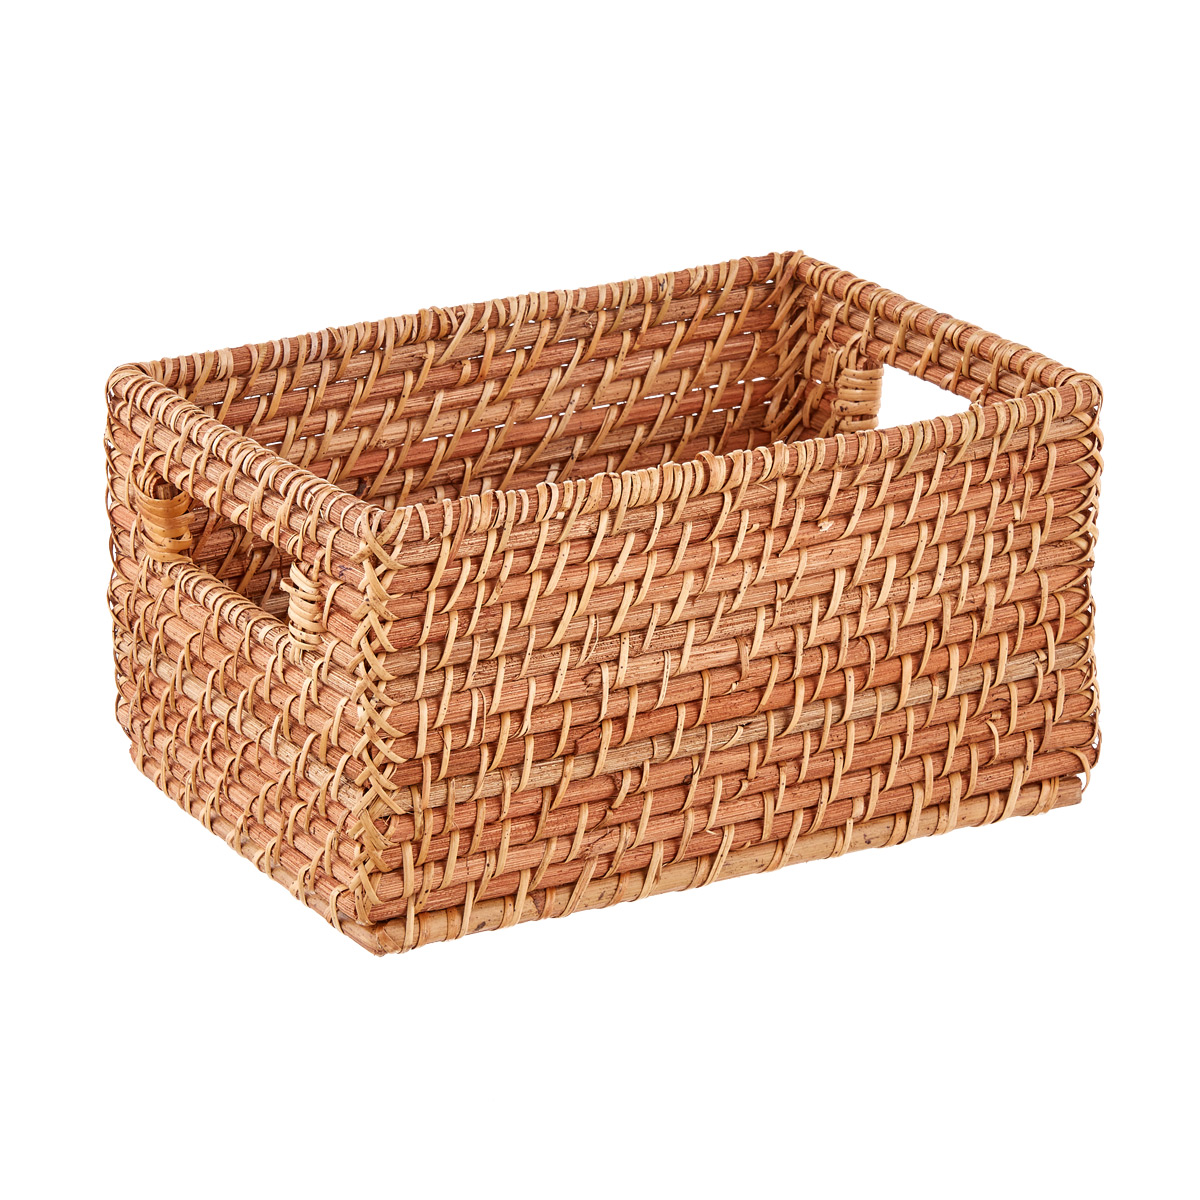 https://www.containerstore.com/catalogimages/455499/10087181-small-rattan-bin-handles-na.jpg